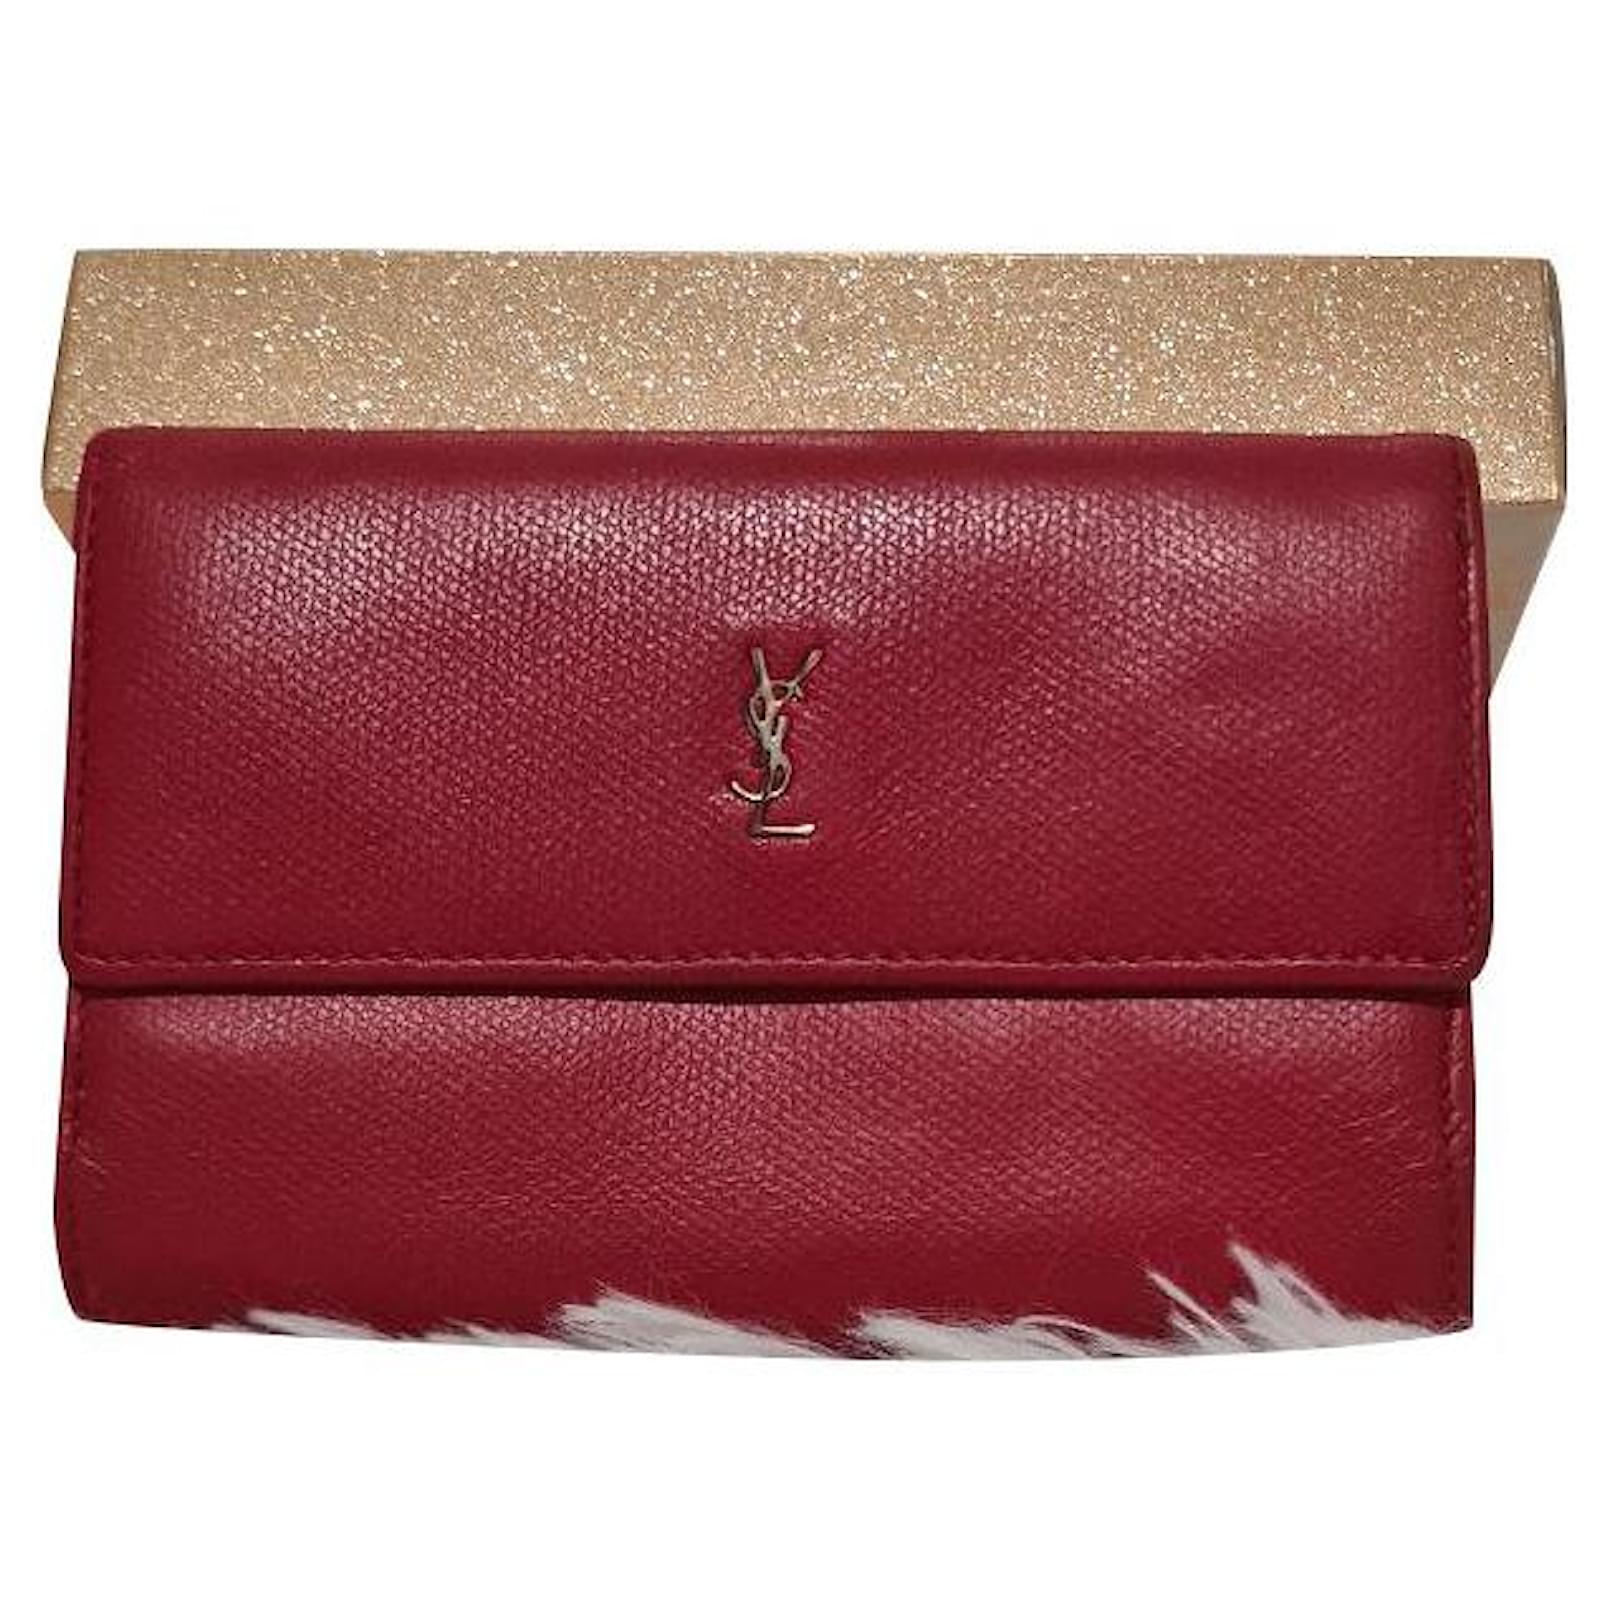 YSL Red Leather Card Holder